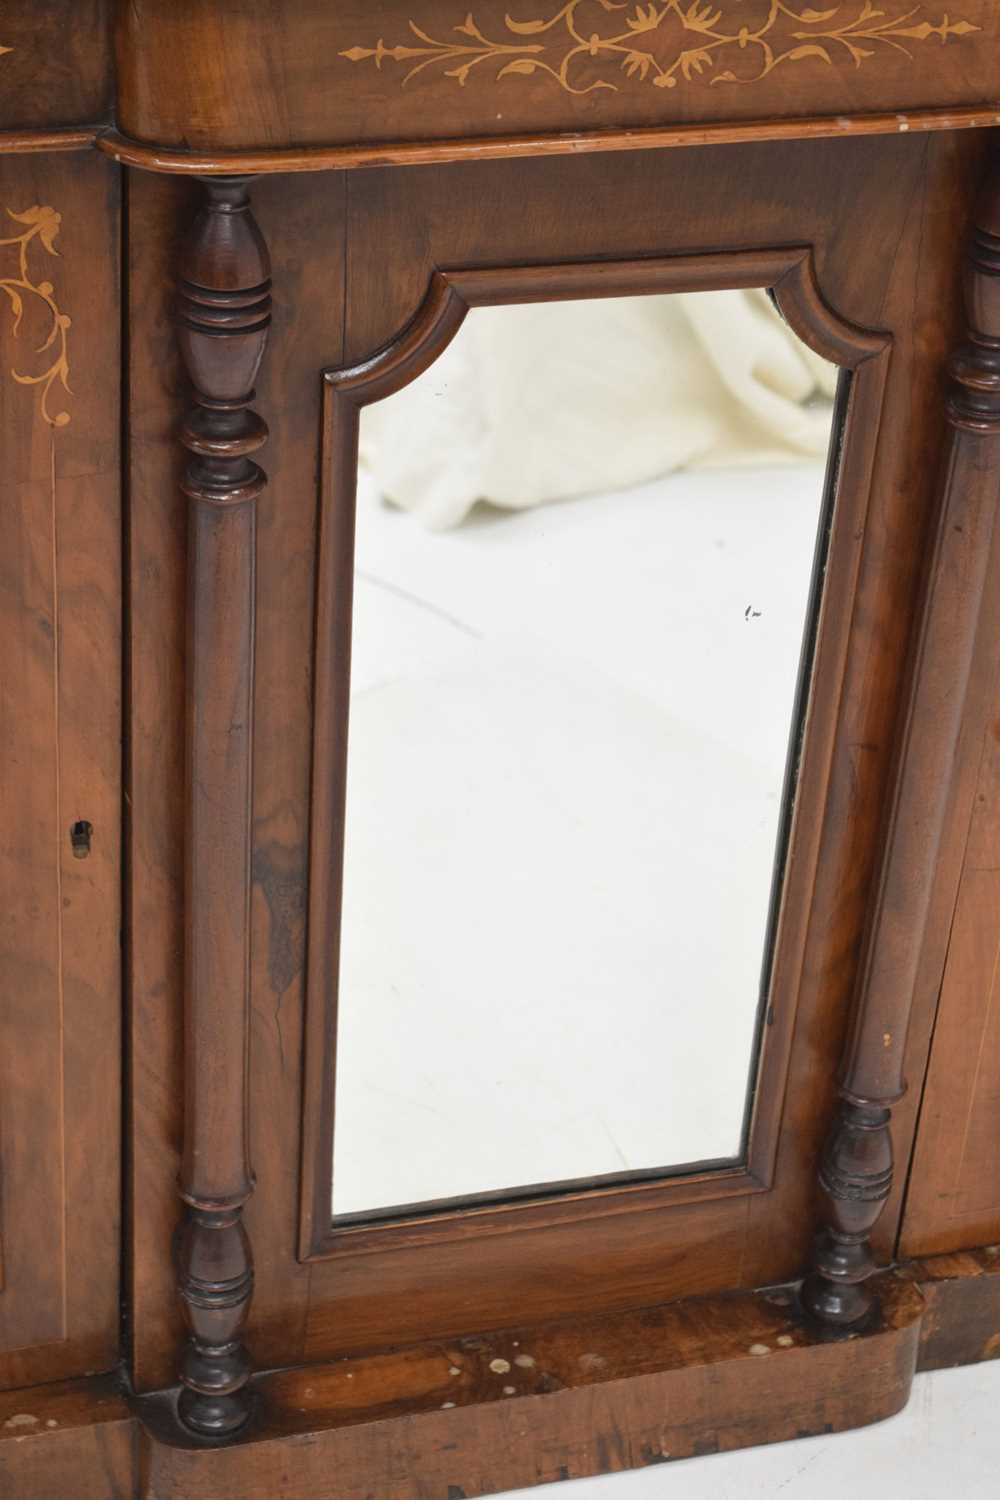 19th century inlaid walnut breakfront credenza or side cabinet with marble top - Image 4 of 13